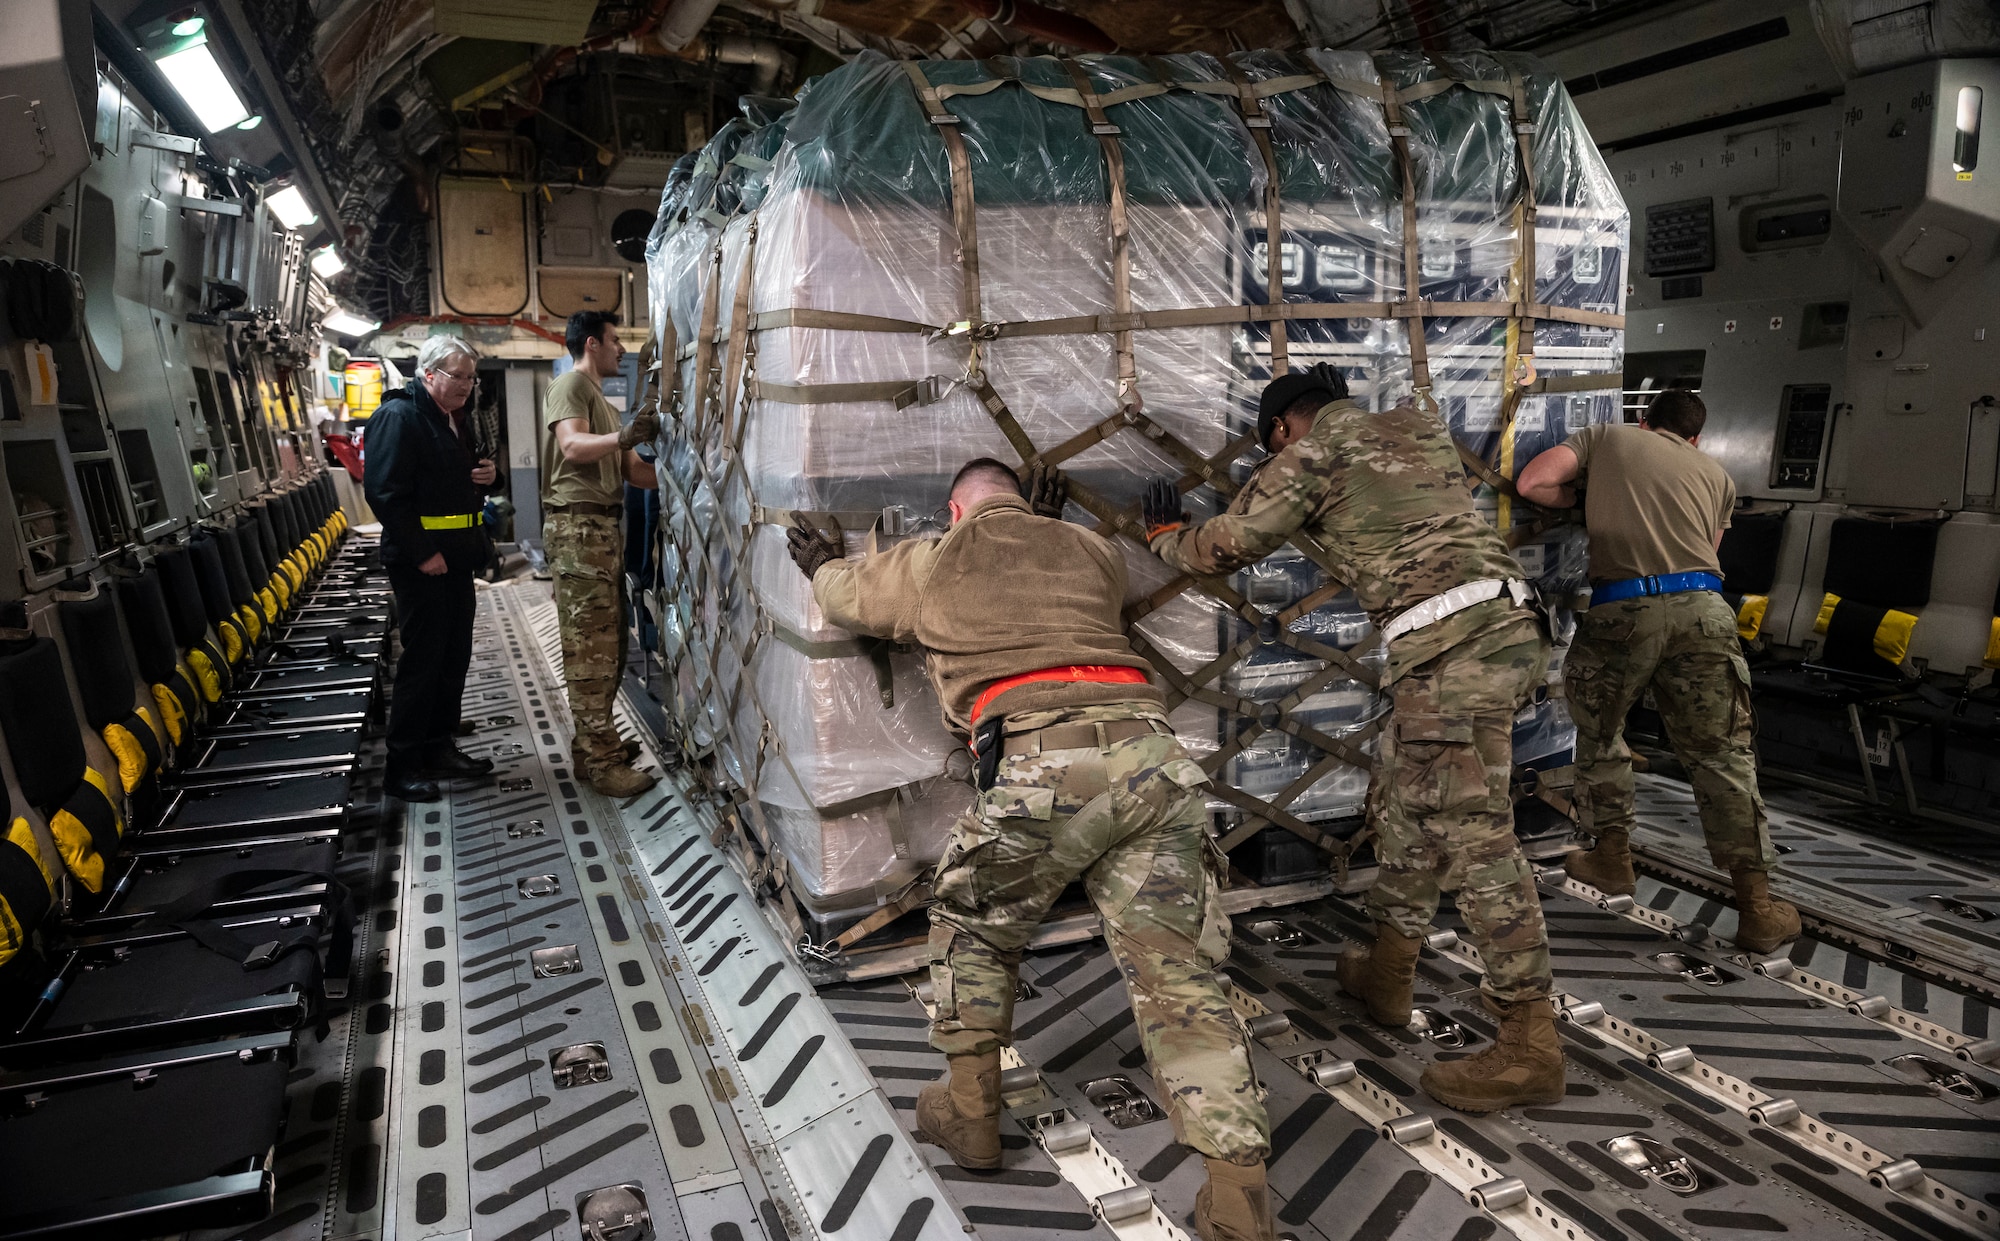 Airmen from the 436th Aerial Port Squadron load a pallet of cargo onto a C-17 Globemaster III on Dover Air Force Base, Delaware, Feb. 7, 2023. The U.S. Agency for International Development (USAID) is mobilizing emergency humanitarian assistance to respond to the devastating impacts in Türkiye following the worst earthquake to hit the region in almost a century. (U.S. Air Force photo by Staff Sgt. Marco A. Gomez)